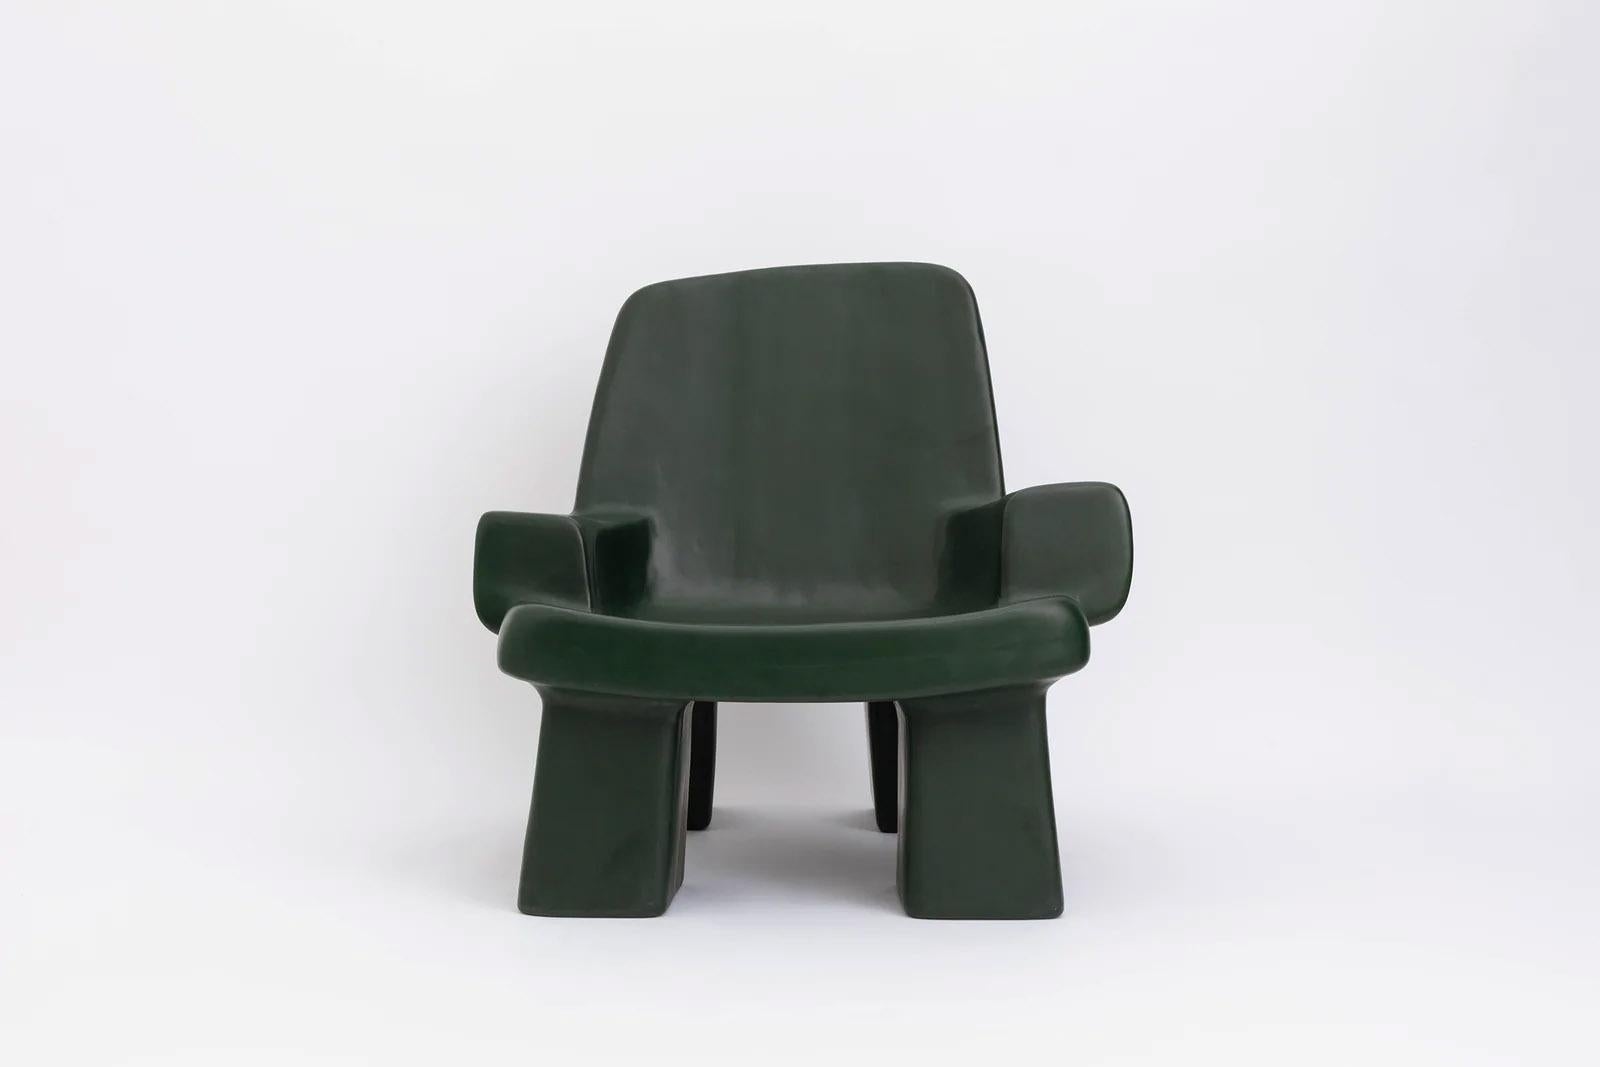 Contemporary fiberglass armchair - Fudge chair by Faye Toogood. This is shown in the malachite fiberglass finish. 
Design: Faye Toogood
Material: Fiberglass 
Available also in charcoal, cream or malachite opaque finish

Faye Toogood’s new Fudge